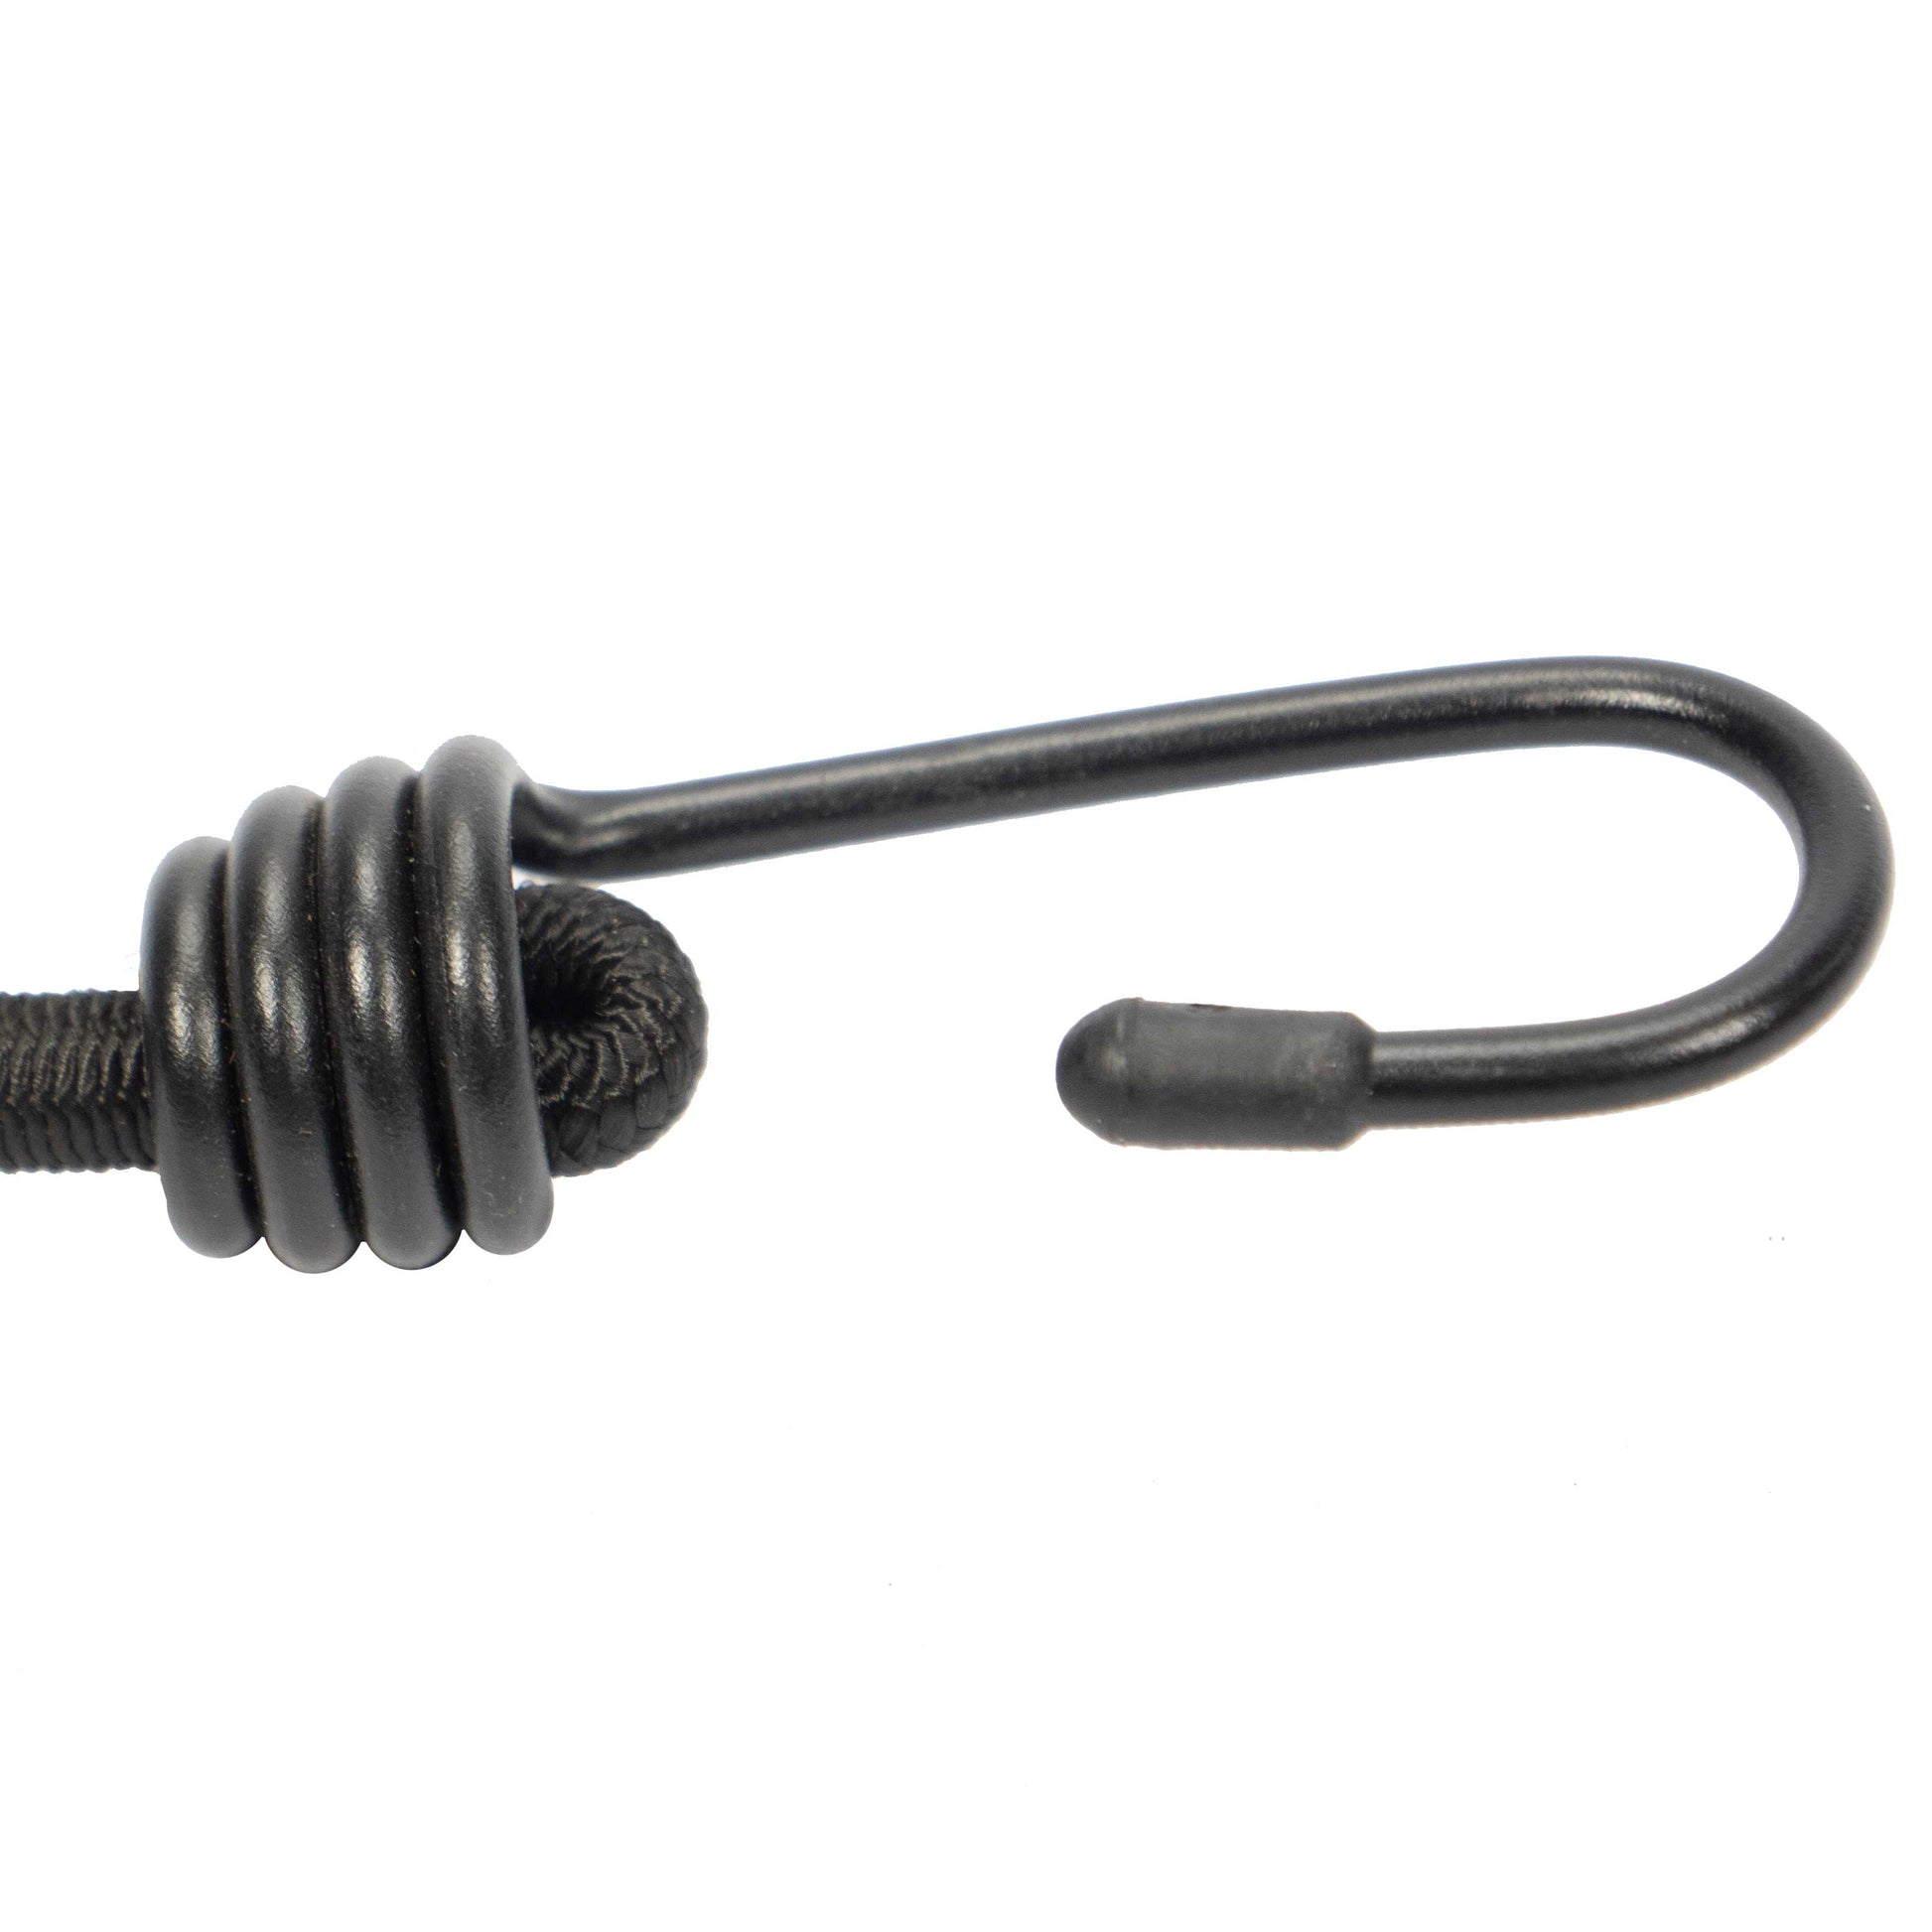 38 inch x 18 inch Black Bungee Cords (bundle of 25) 9mm image 1 of 8 image 2 of 8 image 3 of 8